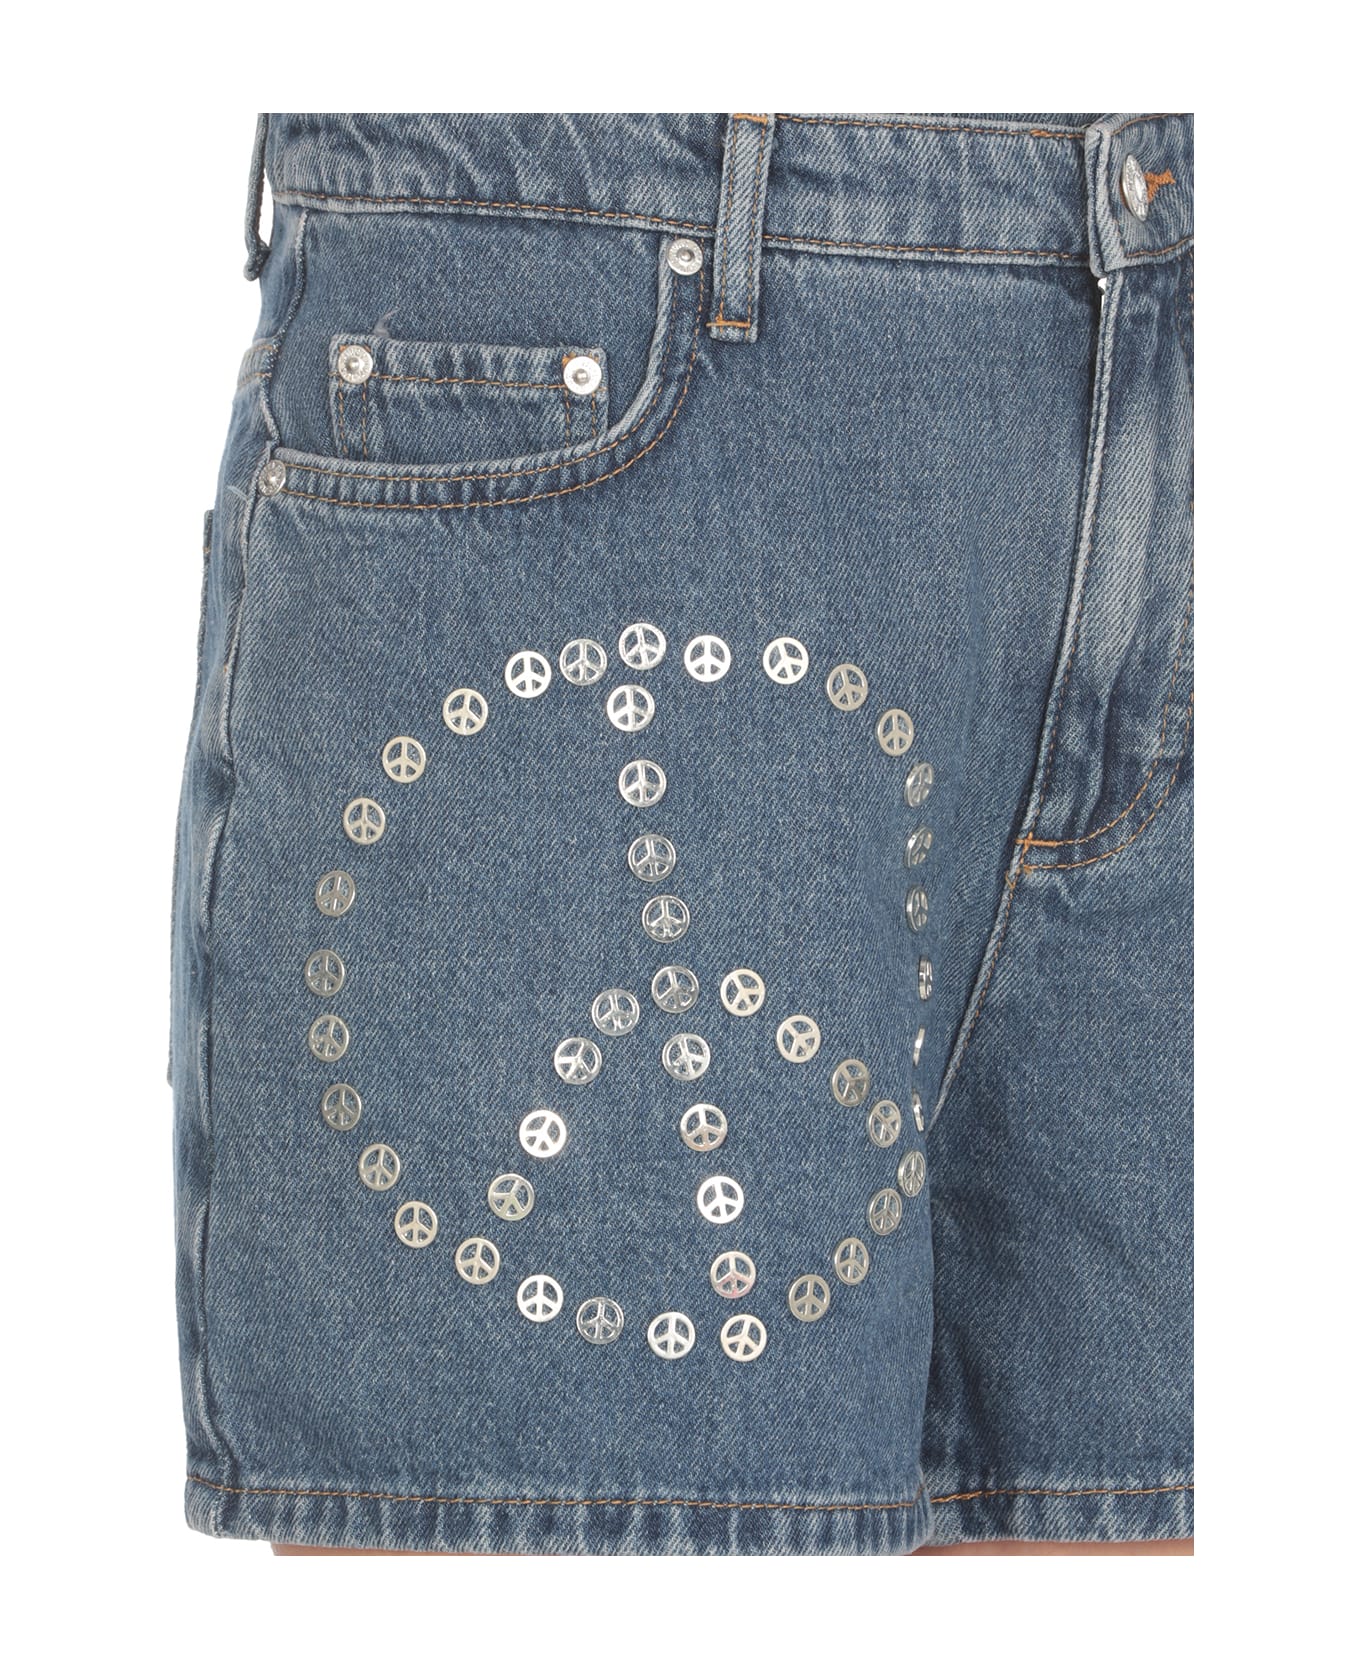 M05CH1N0 Jeans Shorts With Stud - Blue ショートパンツ